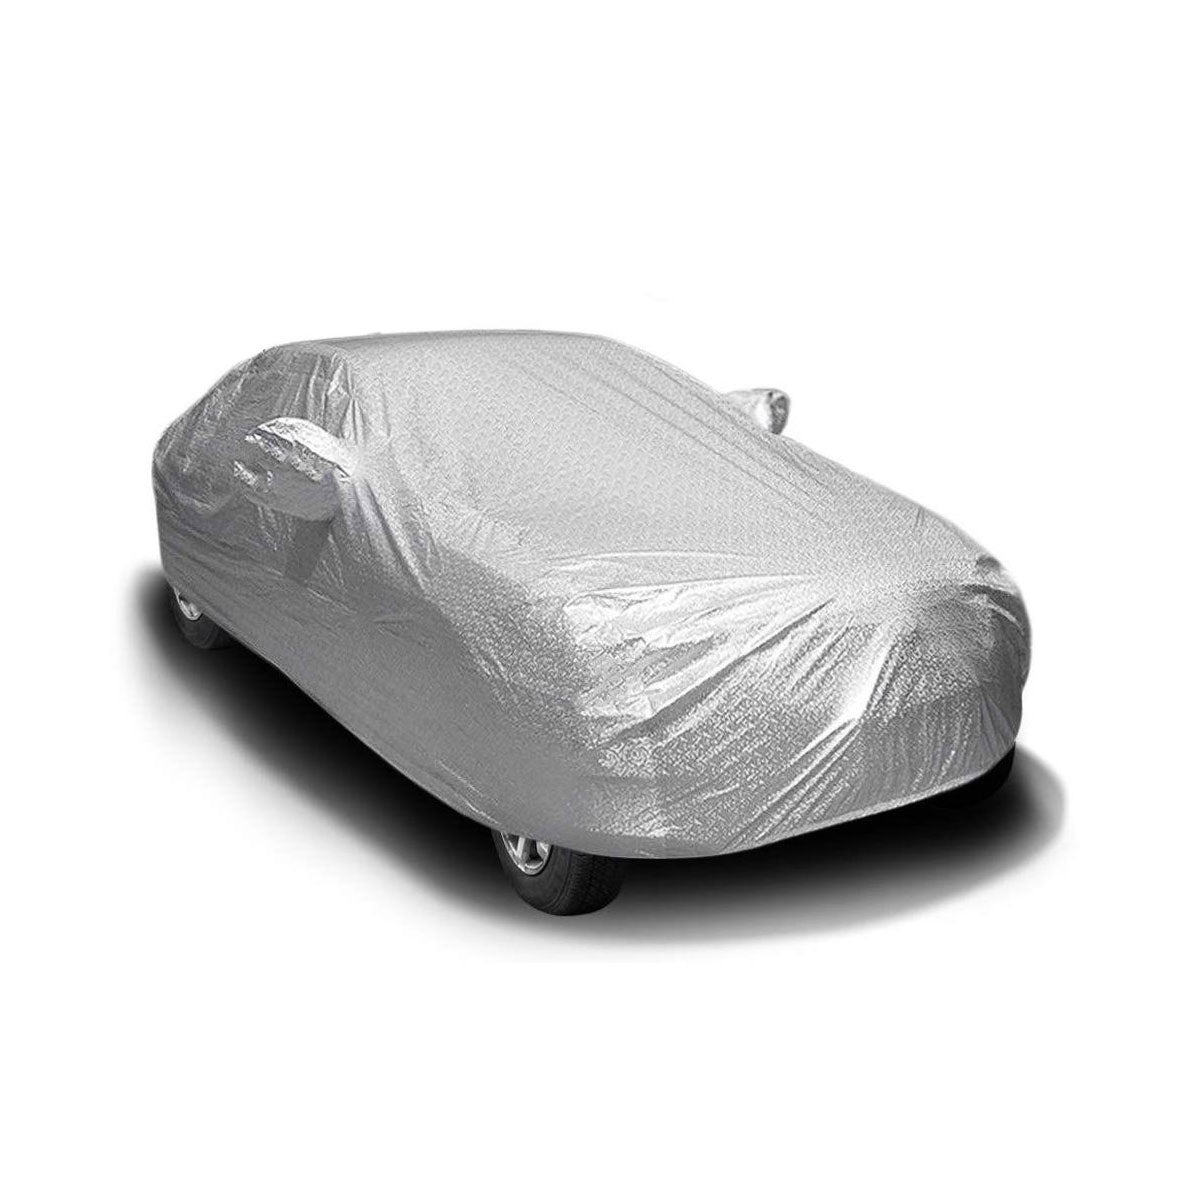 Oshotto Spyro Silver Anti Reflective, dustproof and Water Proof Car Body Cover with Mirror Pockets For Skoda Kushaq